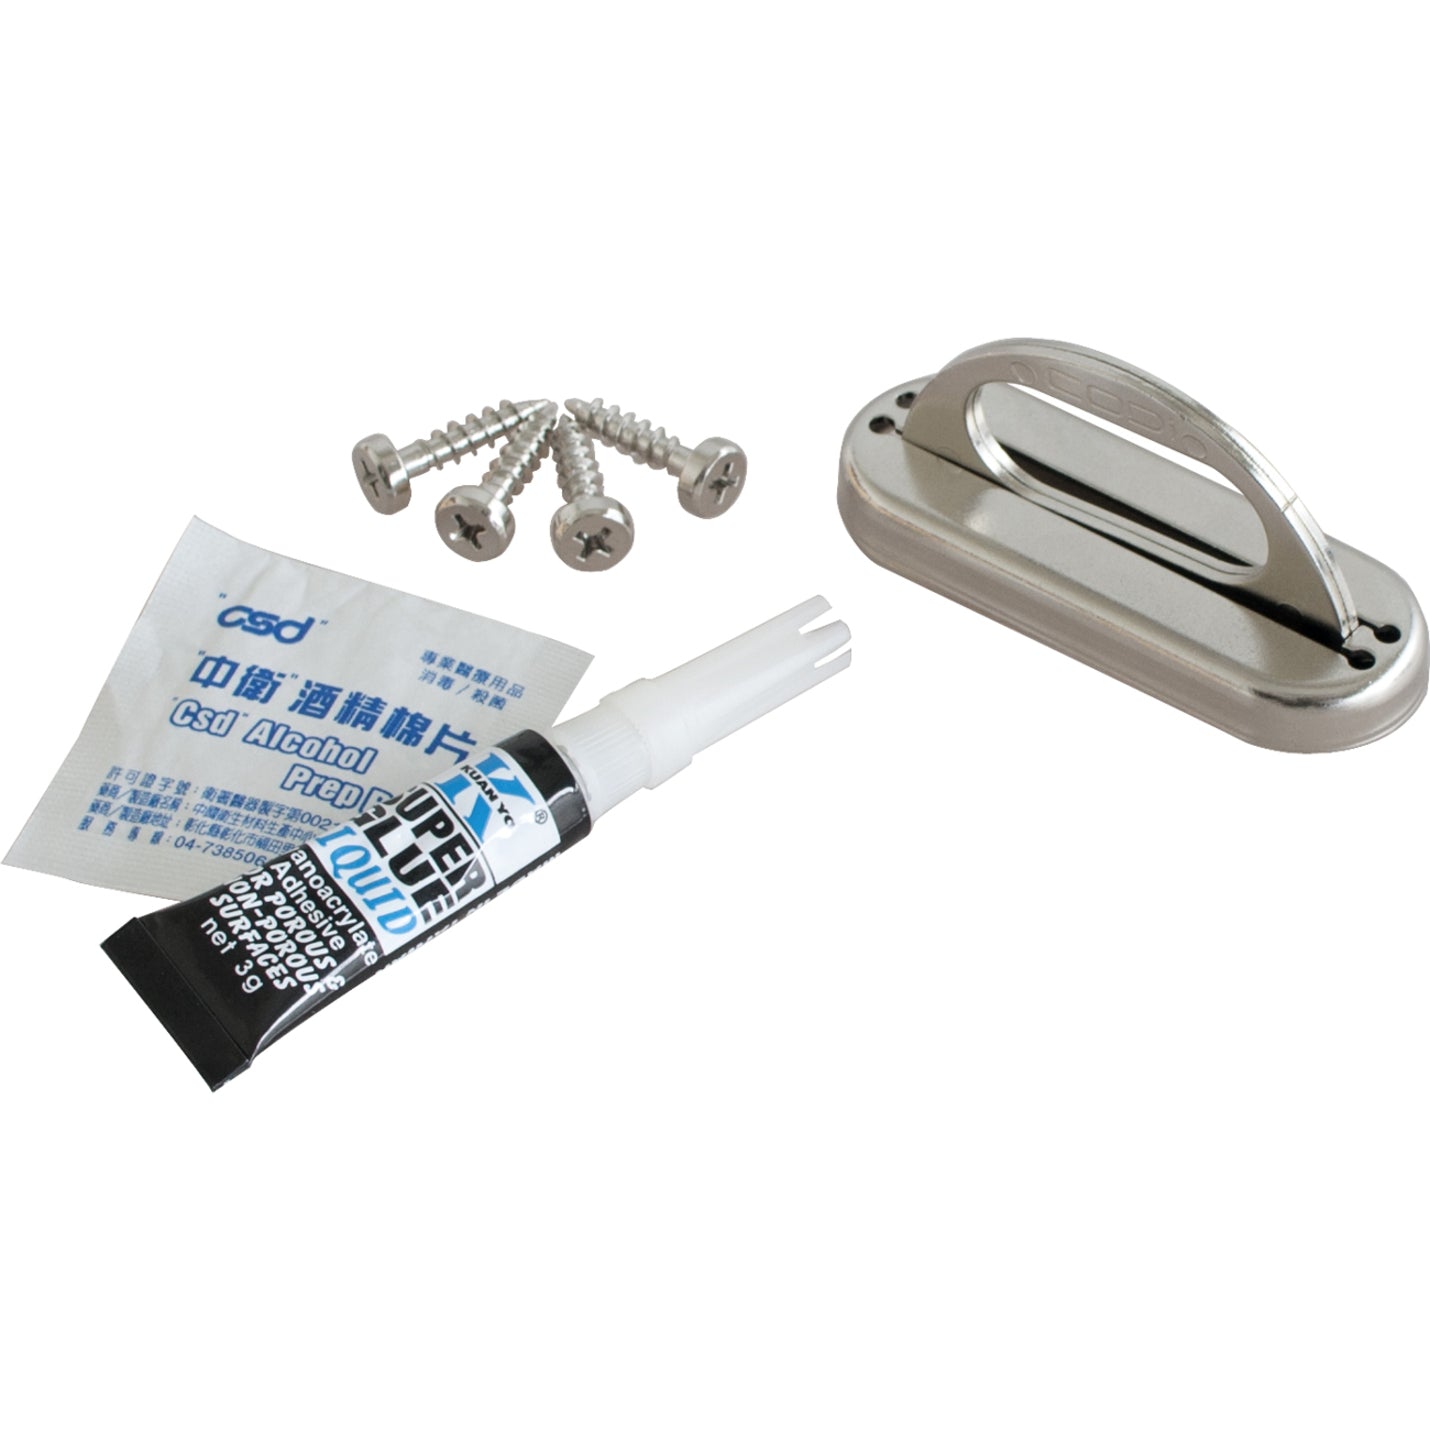 CODi A02016 Steel Anchor with Glue Kit, Secure Permanent Anchor Point for All CODi Cable Locks